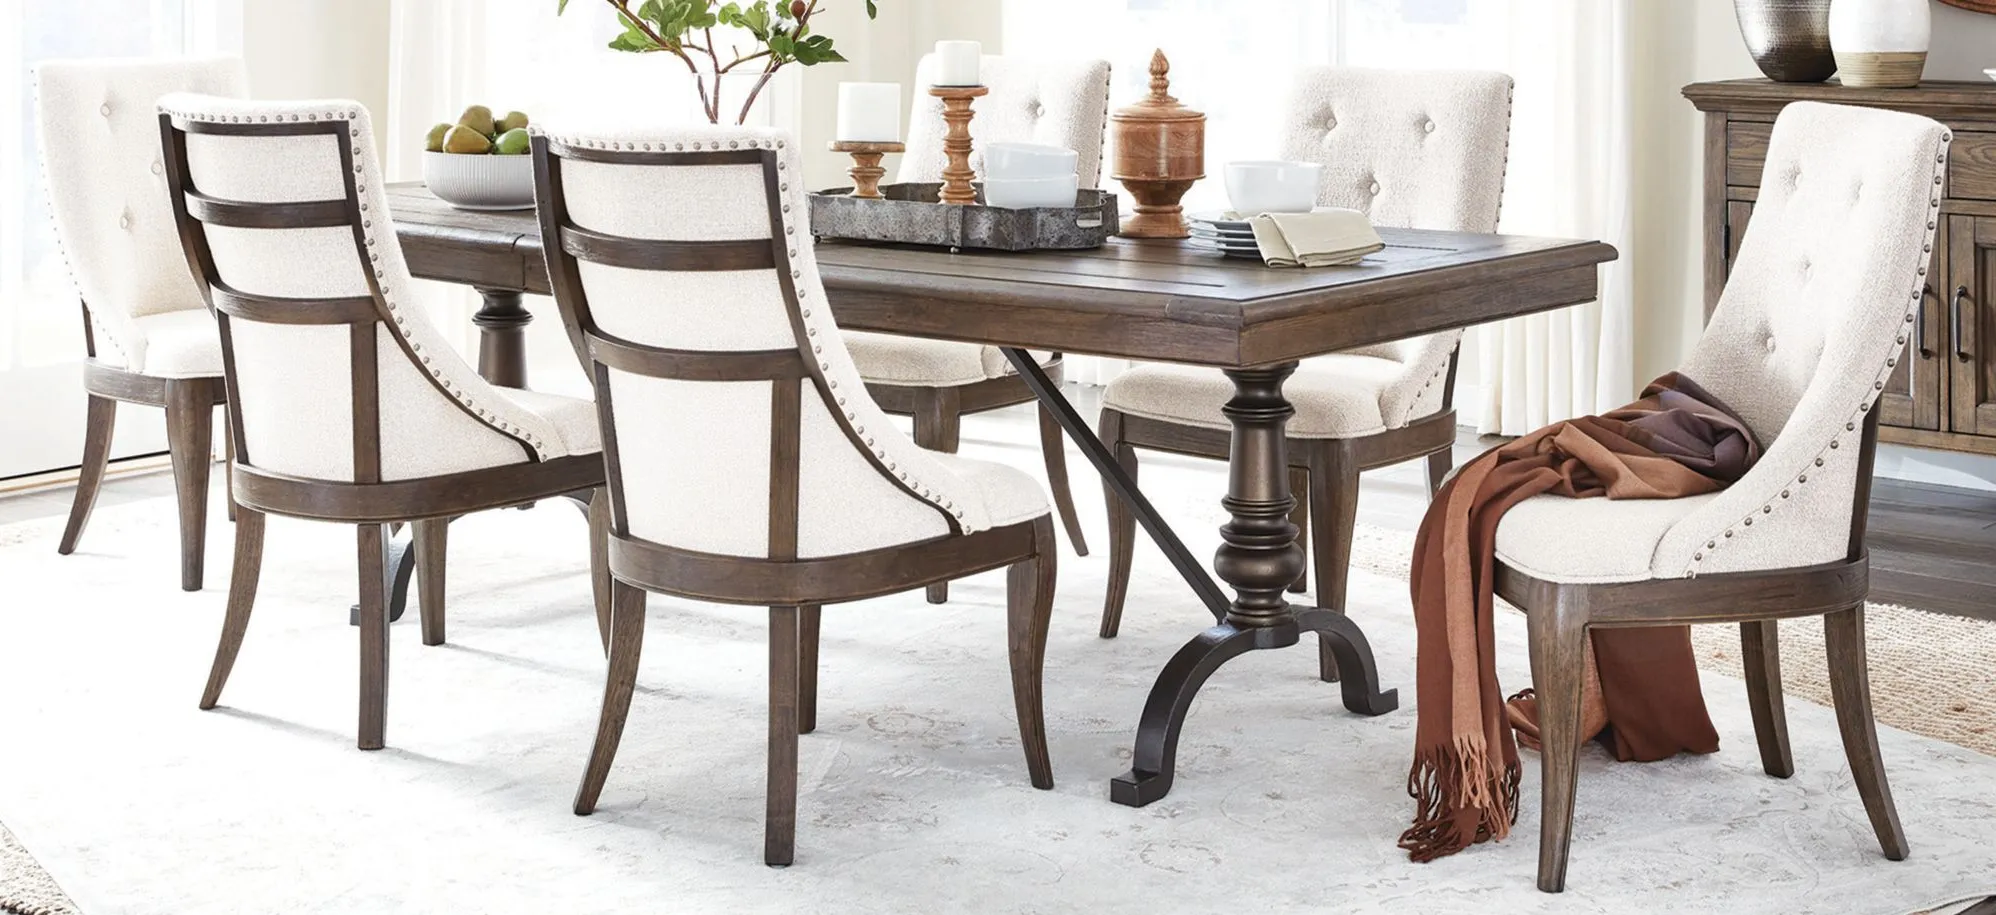 Roxbury Manor 7-pc. Dining Set in Brown/White by Magnussen Home